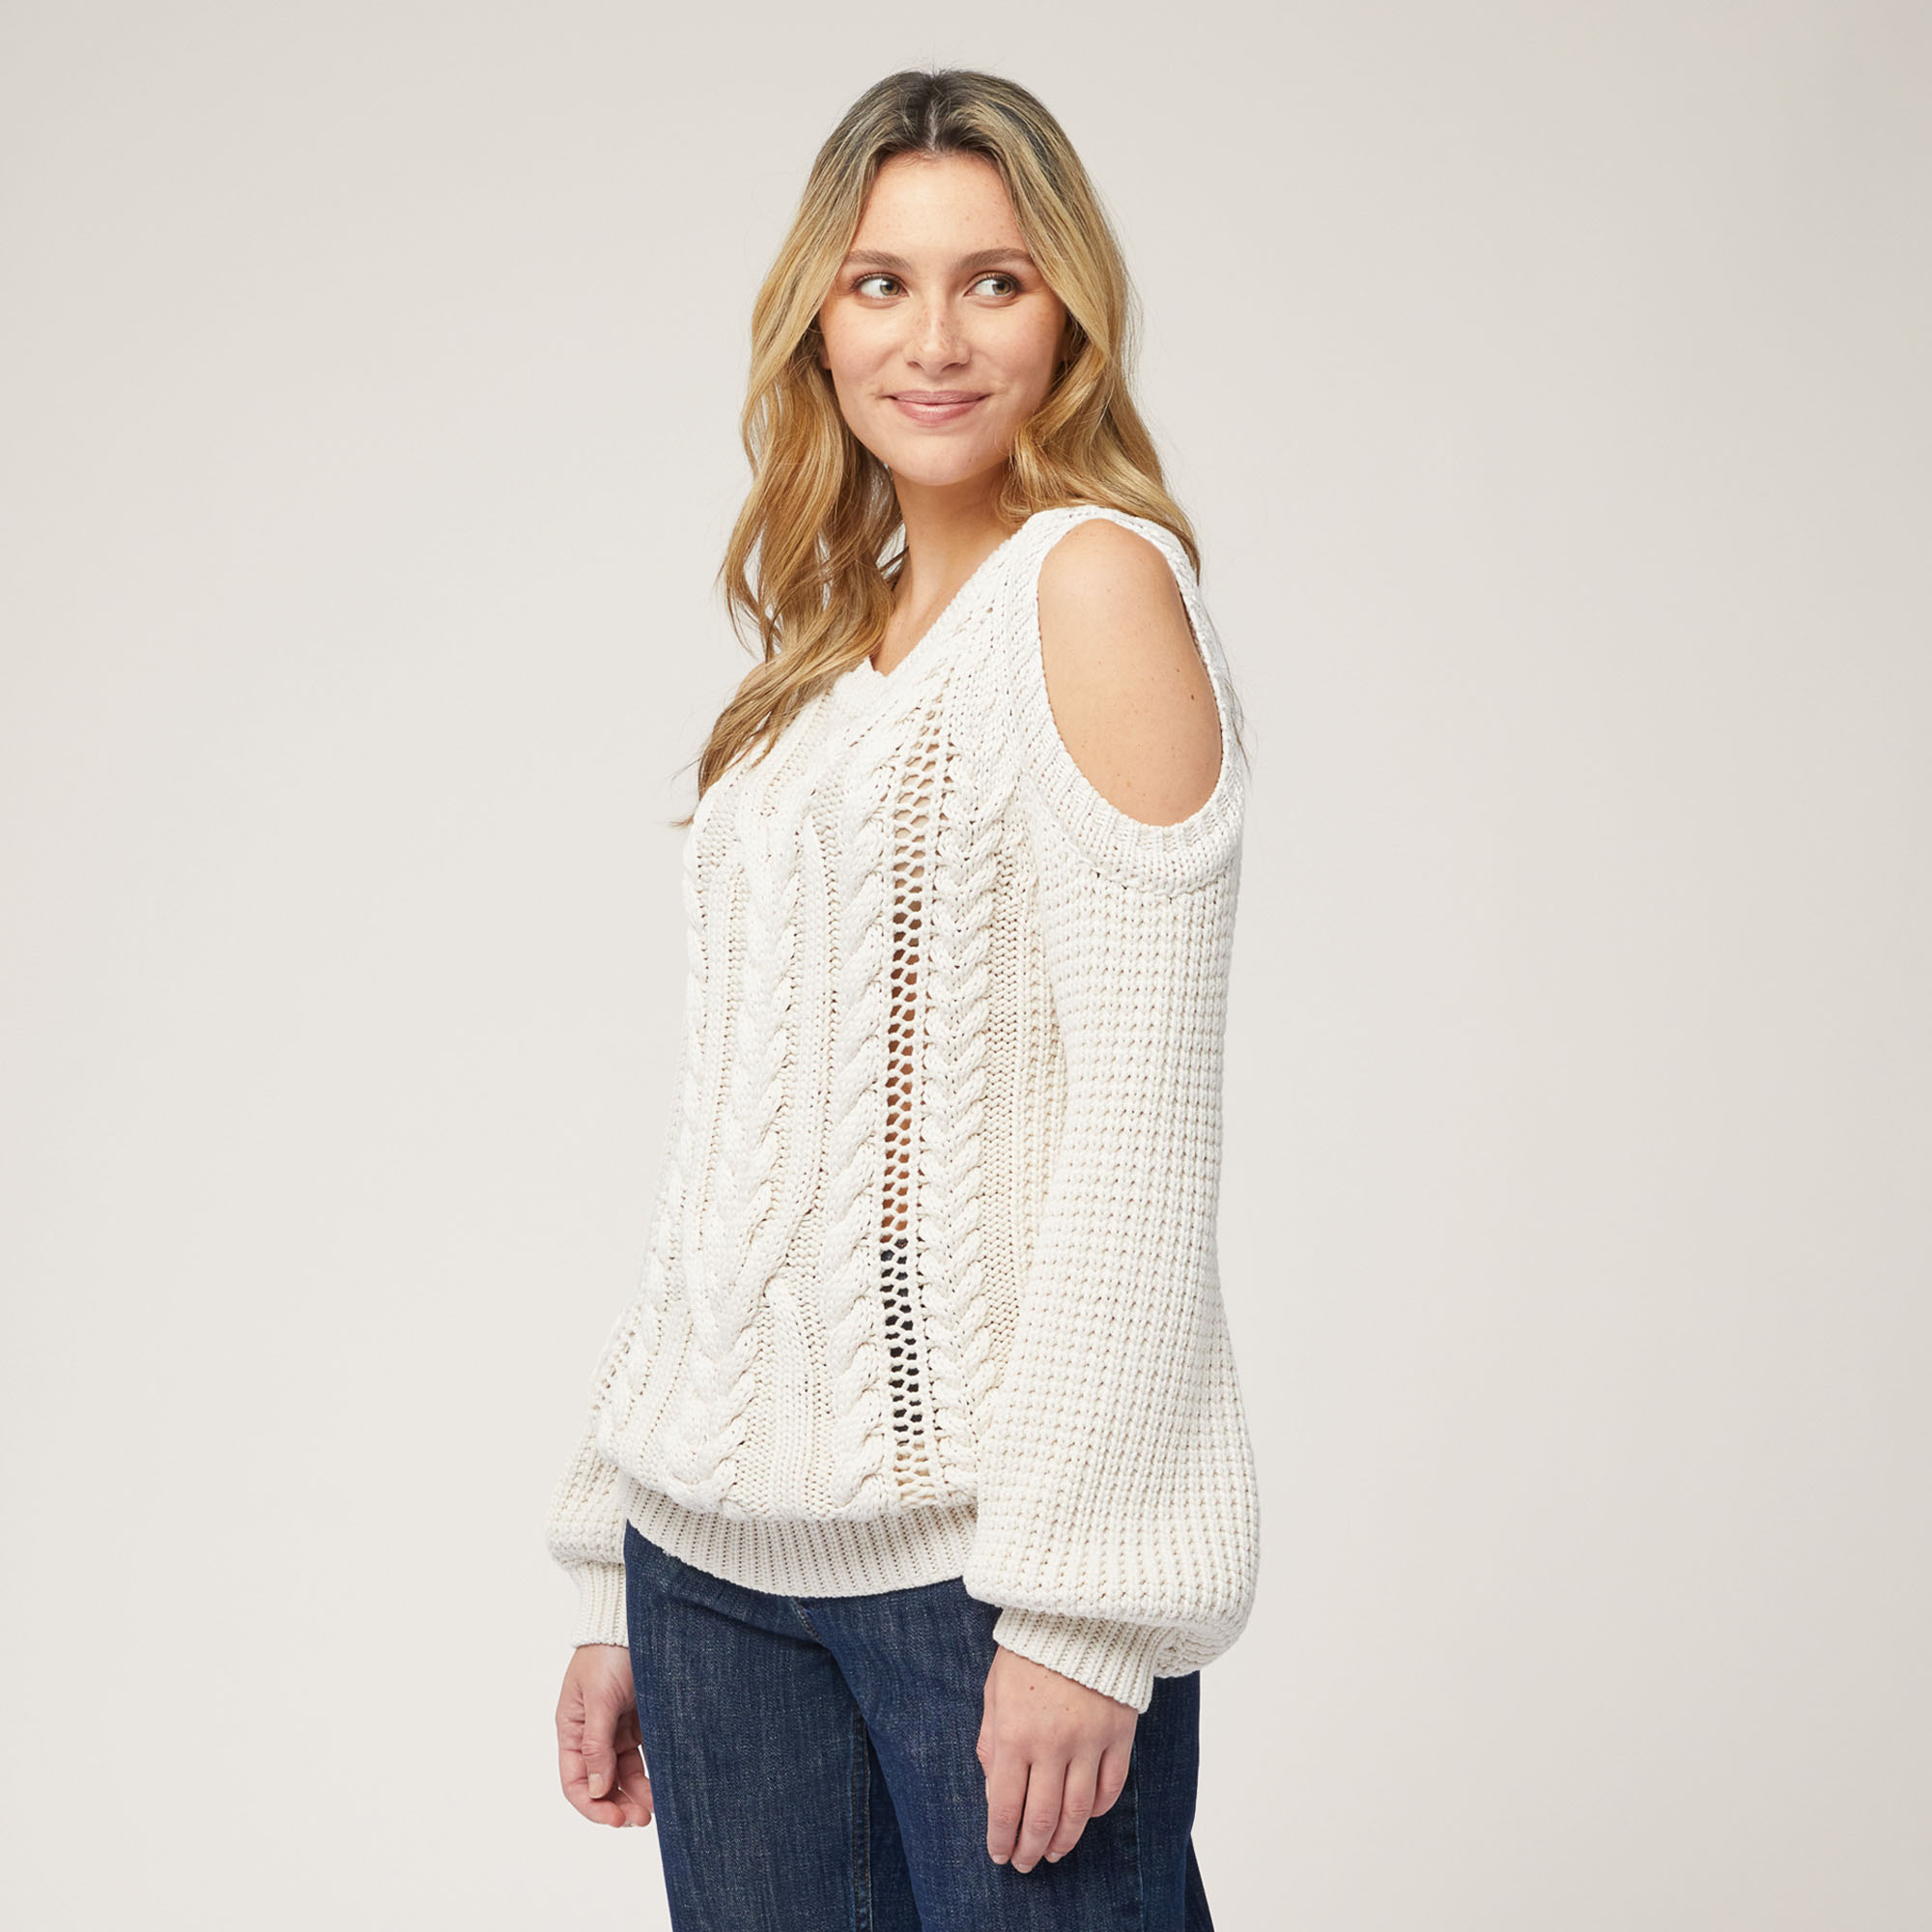 Sweater with Shoulder Openings